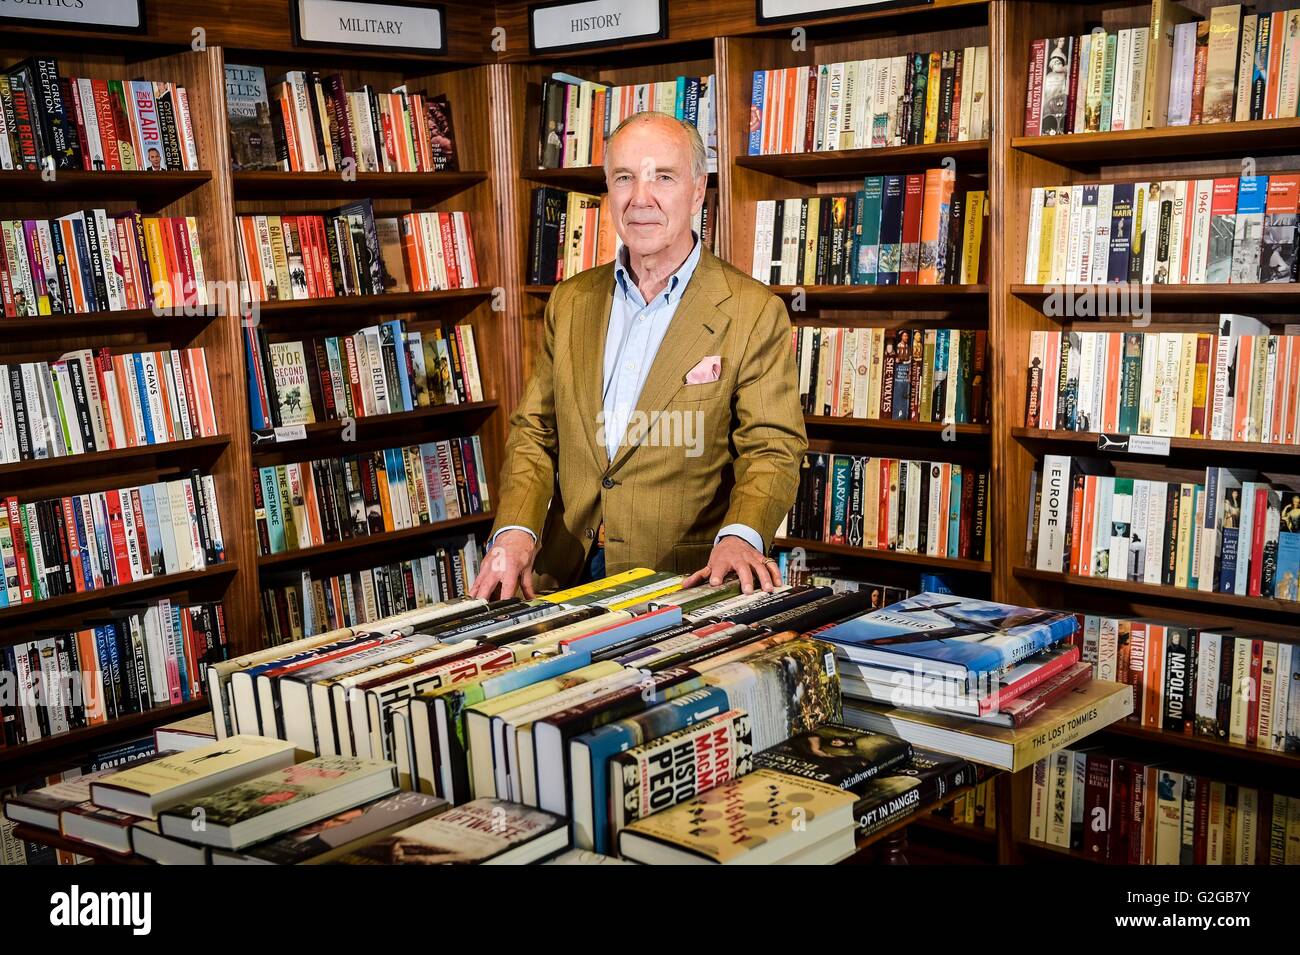 Robert Hiscox in his White Horse Bookshop in Marlborough, Wiltshire, as the city grandee has launched a blistering attack on David Cameron's campaign to remain in the EU, dubbing it corrupt and accusing the Treasury of disseminating illegal propaganda. Stock Photo